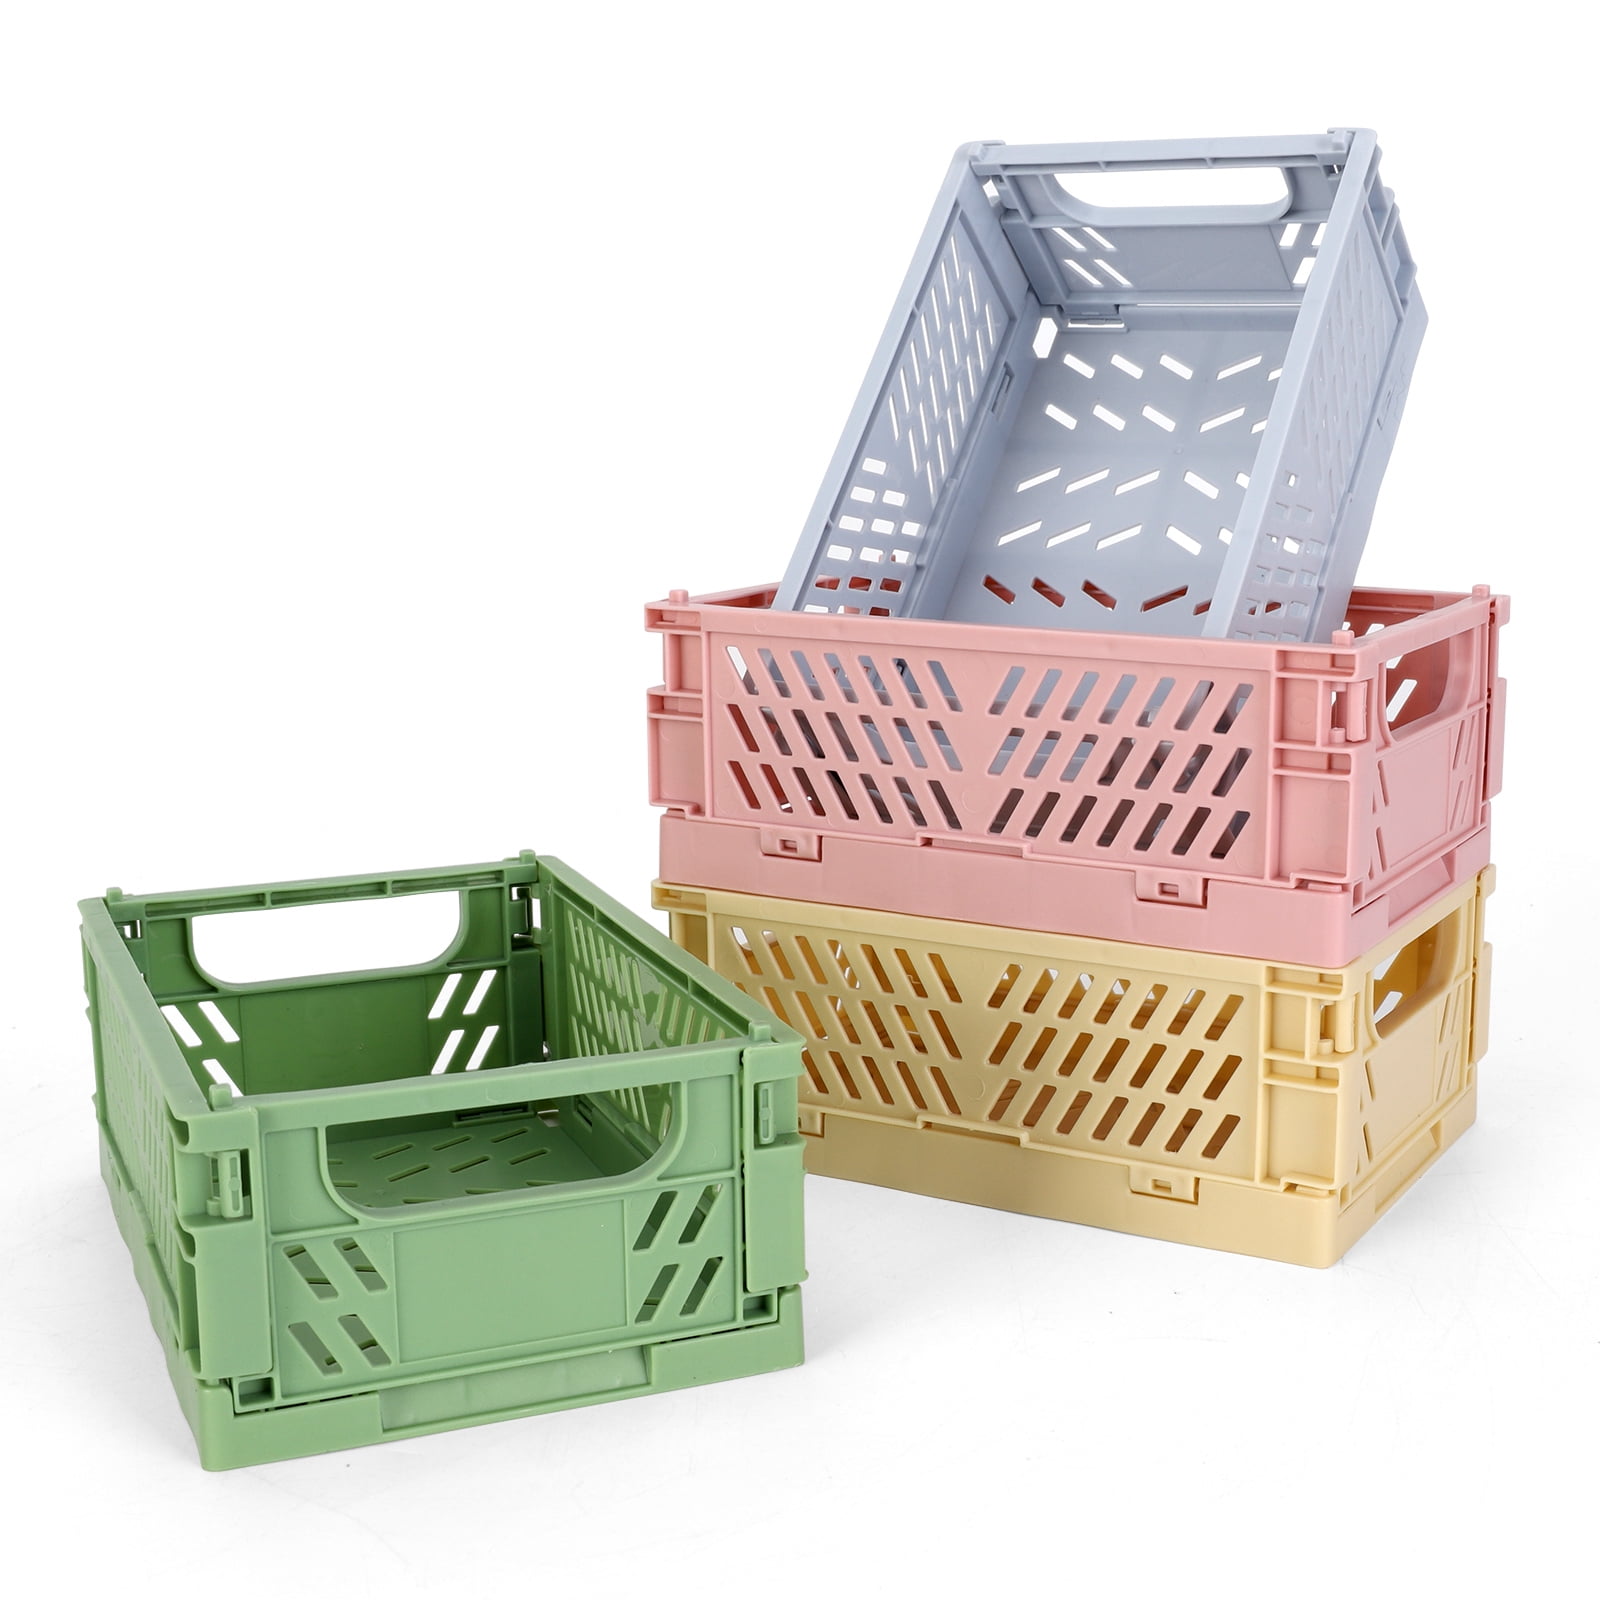 Plastic Baskets Organization Trays with Handles for School Office,Home,Kitchen Classroom Office File Holder Xuheng Pack of 4 Paper Organizer Basket with Box Paper Clips Binder Clips 